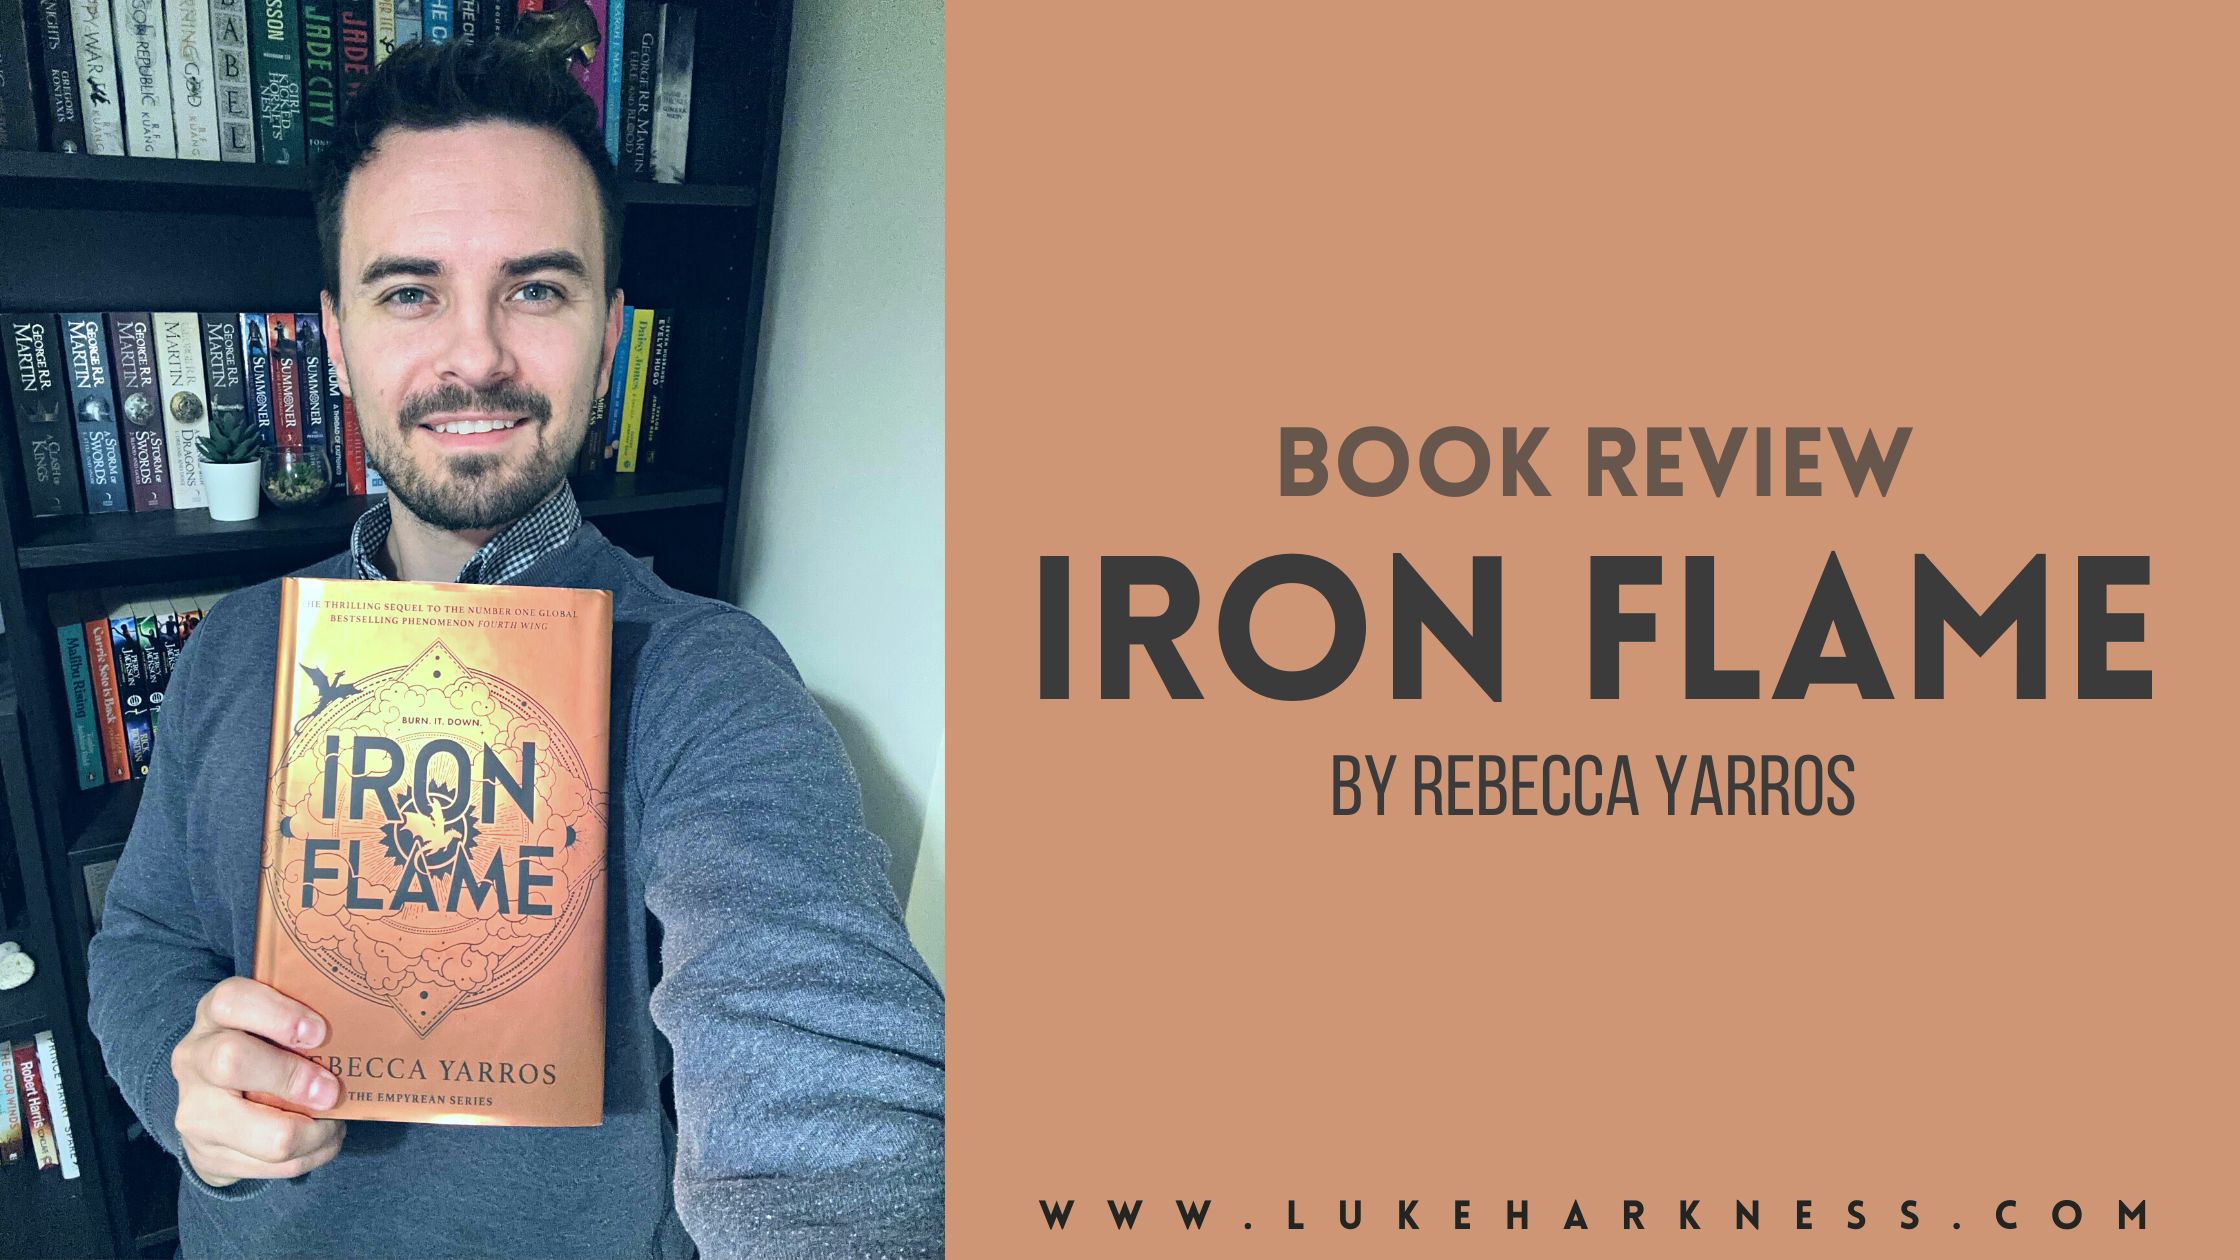 Iron Flame by Rebecca Yarros book review - Luke’s Blog